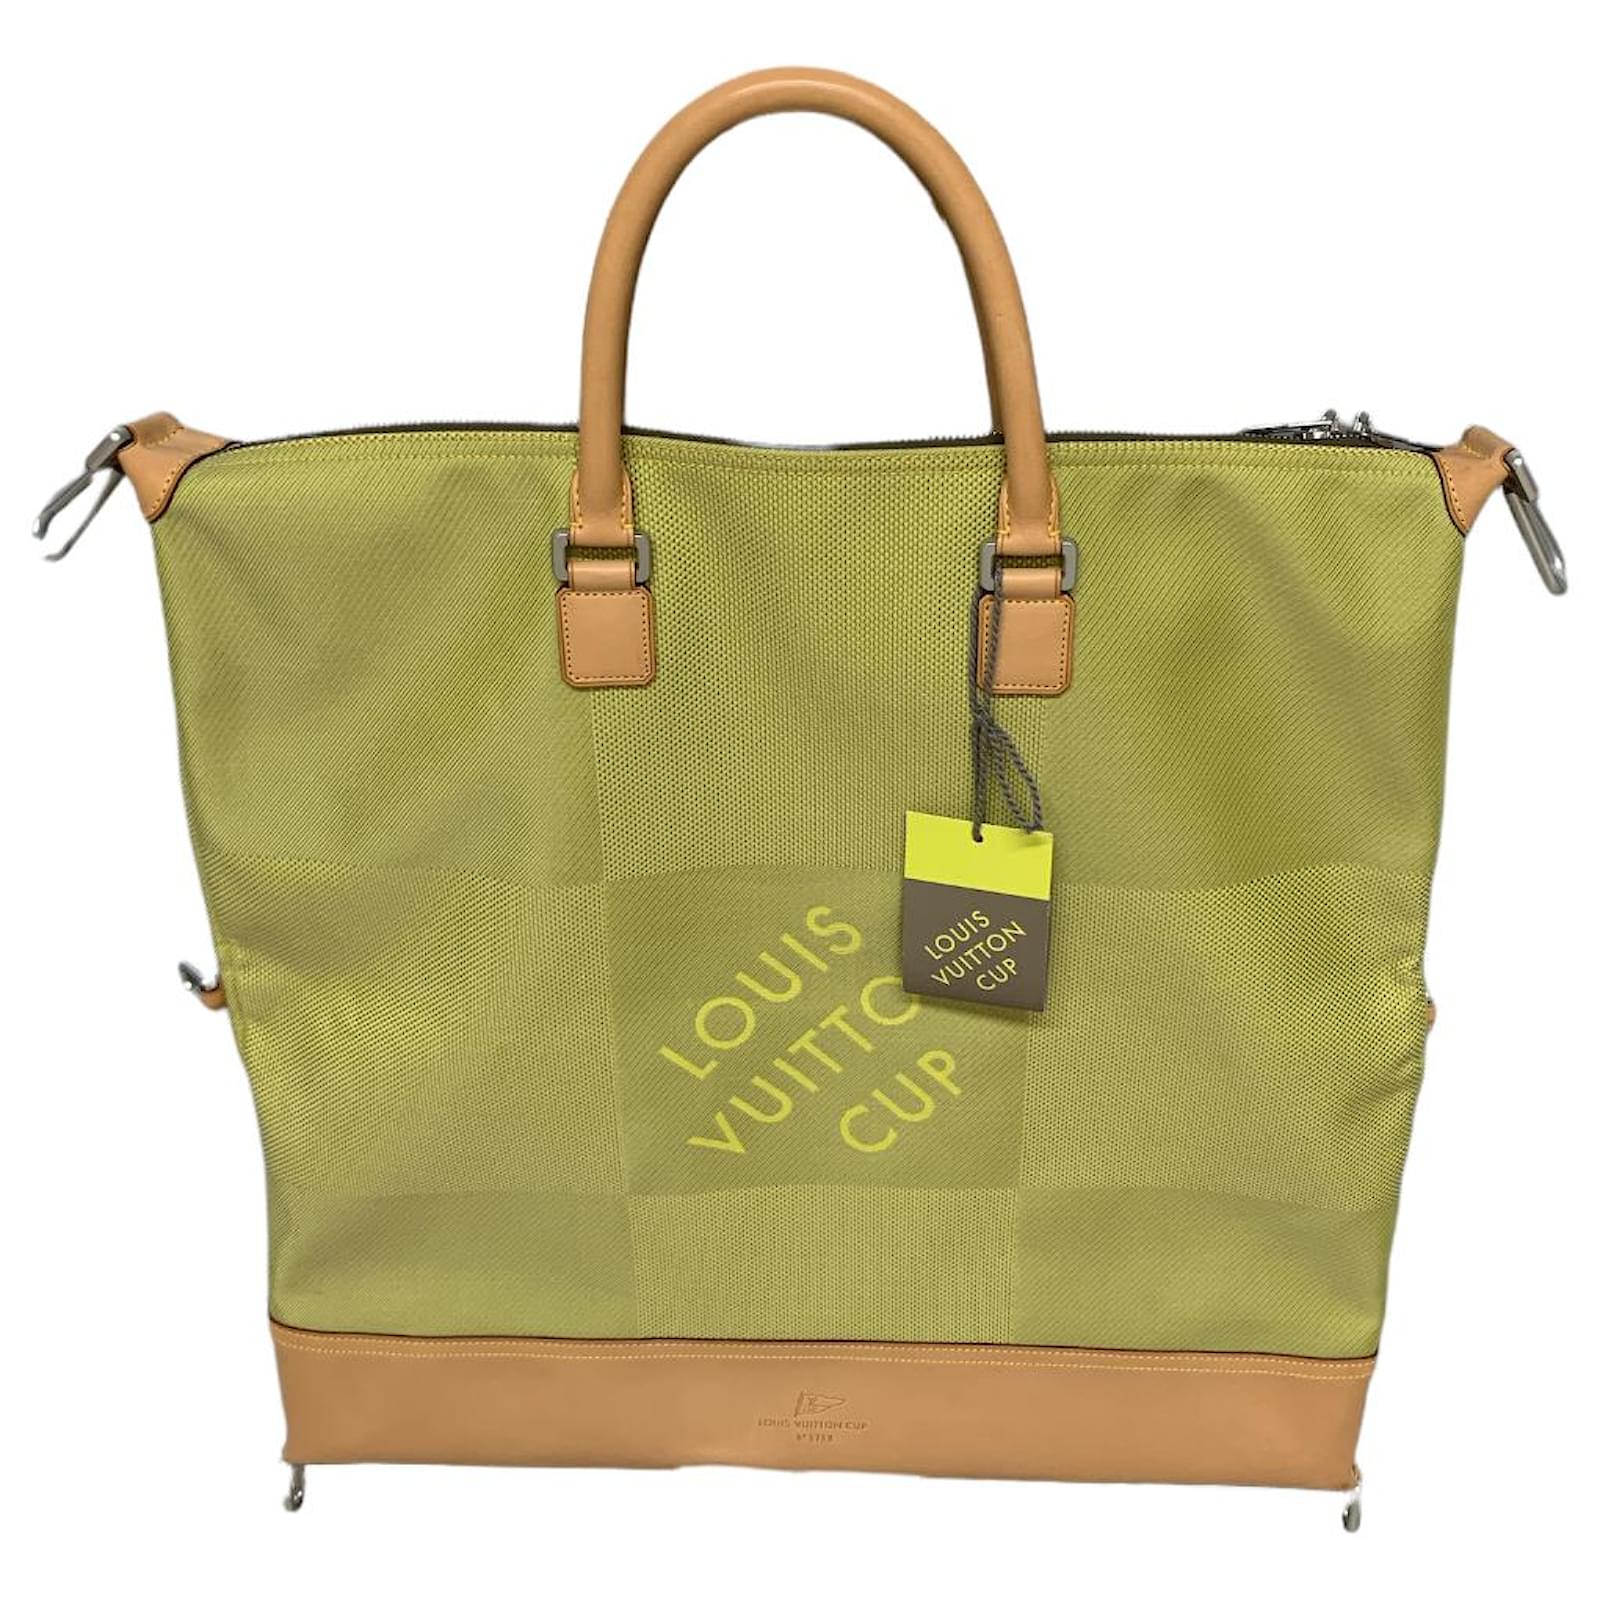 Louis Vuitton Americas Cup travel bag in yellow damier canvas and